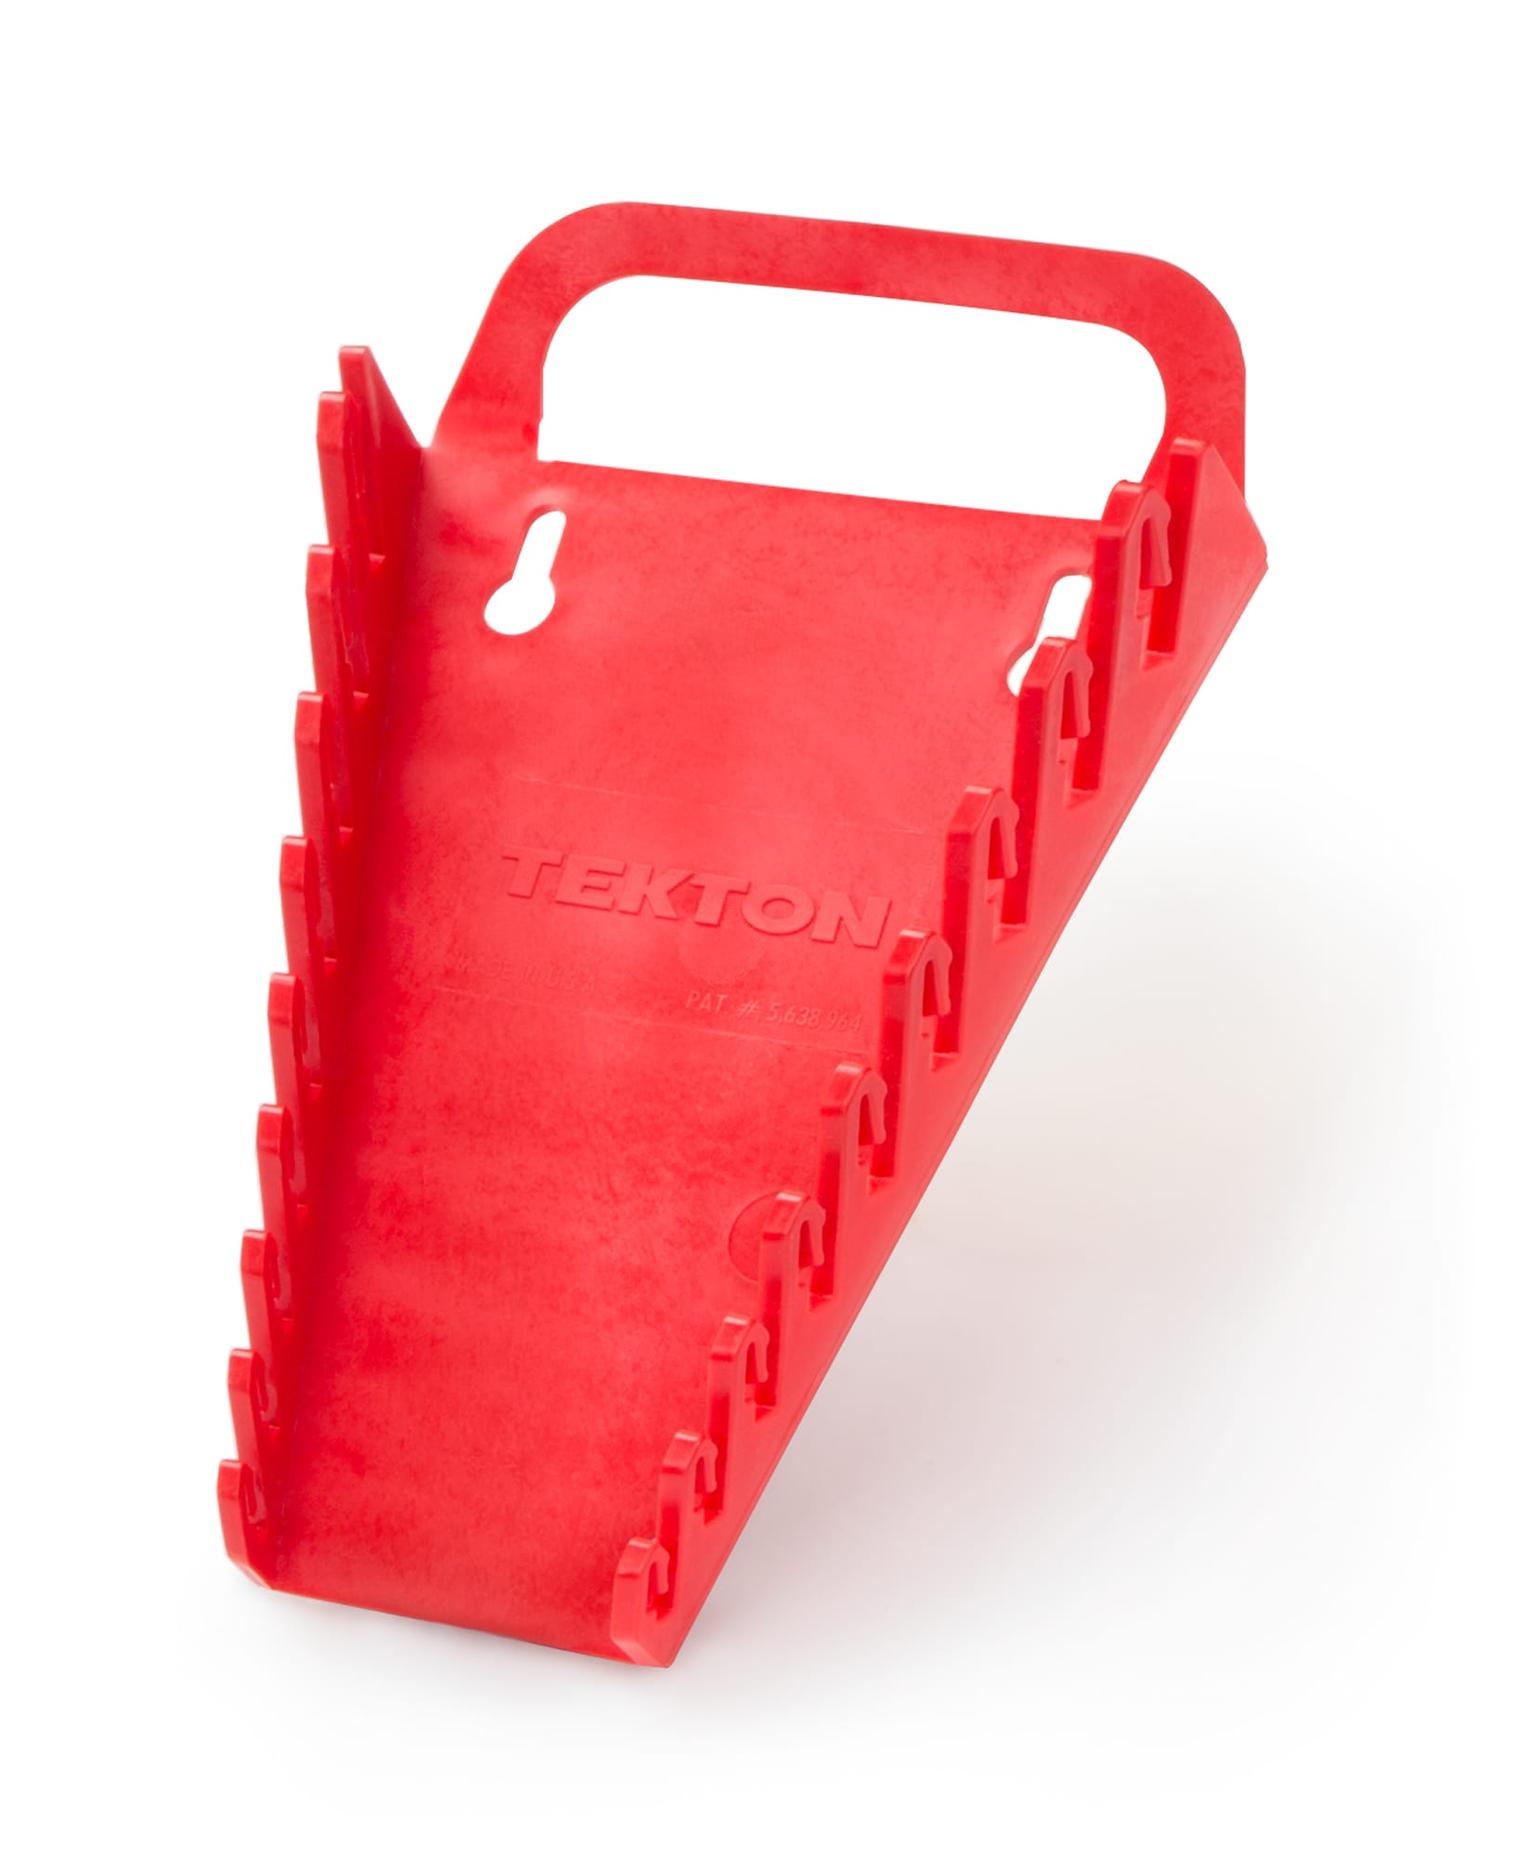 TEKTON 79365-T 9-Tool Combination Wrench Holder (Red)